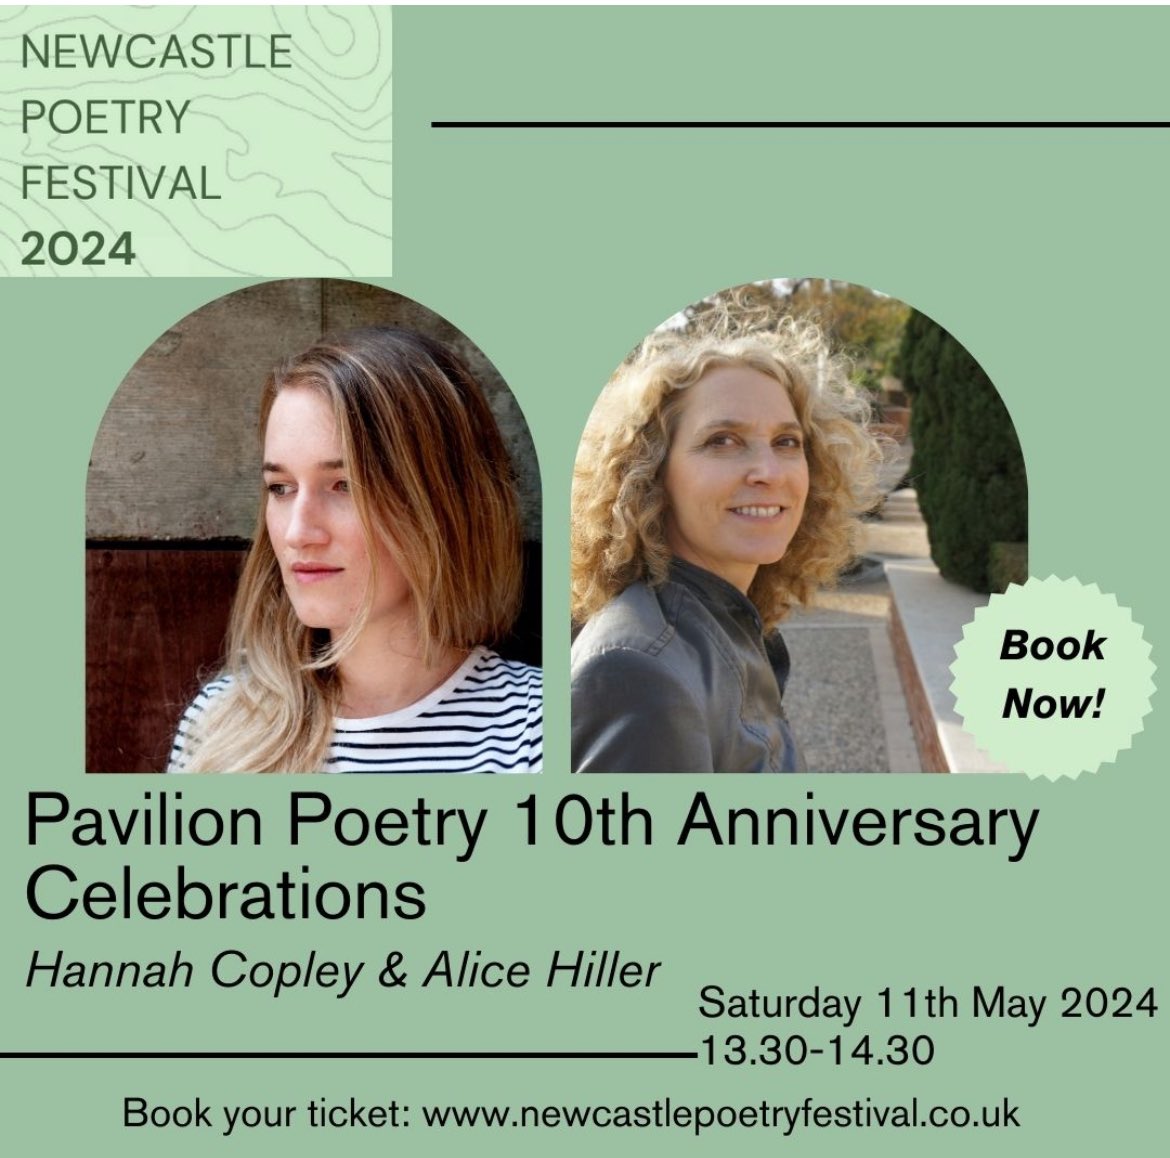 We are so excited to host @HCopley & @alice_hiller to help celebrate @PavilionPoetry 10th Anniversary 🎉🎈We look forward to hearing poems from dynamic collections ‘Lapwing’ & ‘bird of winter’ 🐦🕊️📚Sat 11 May 1.30-2.30pm newcastlepoetryfestival.co.uk 🎫